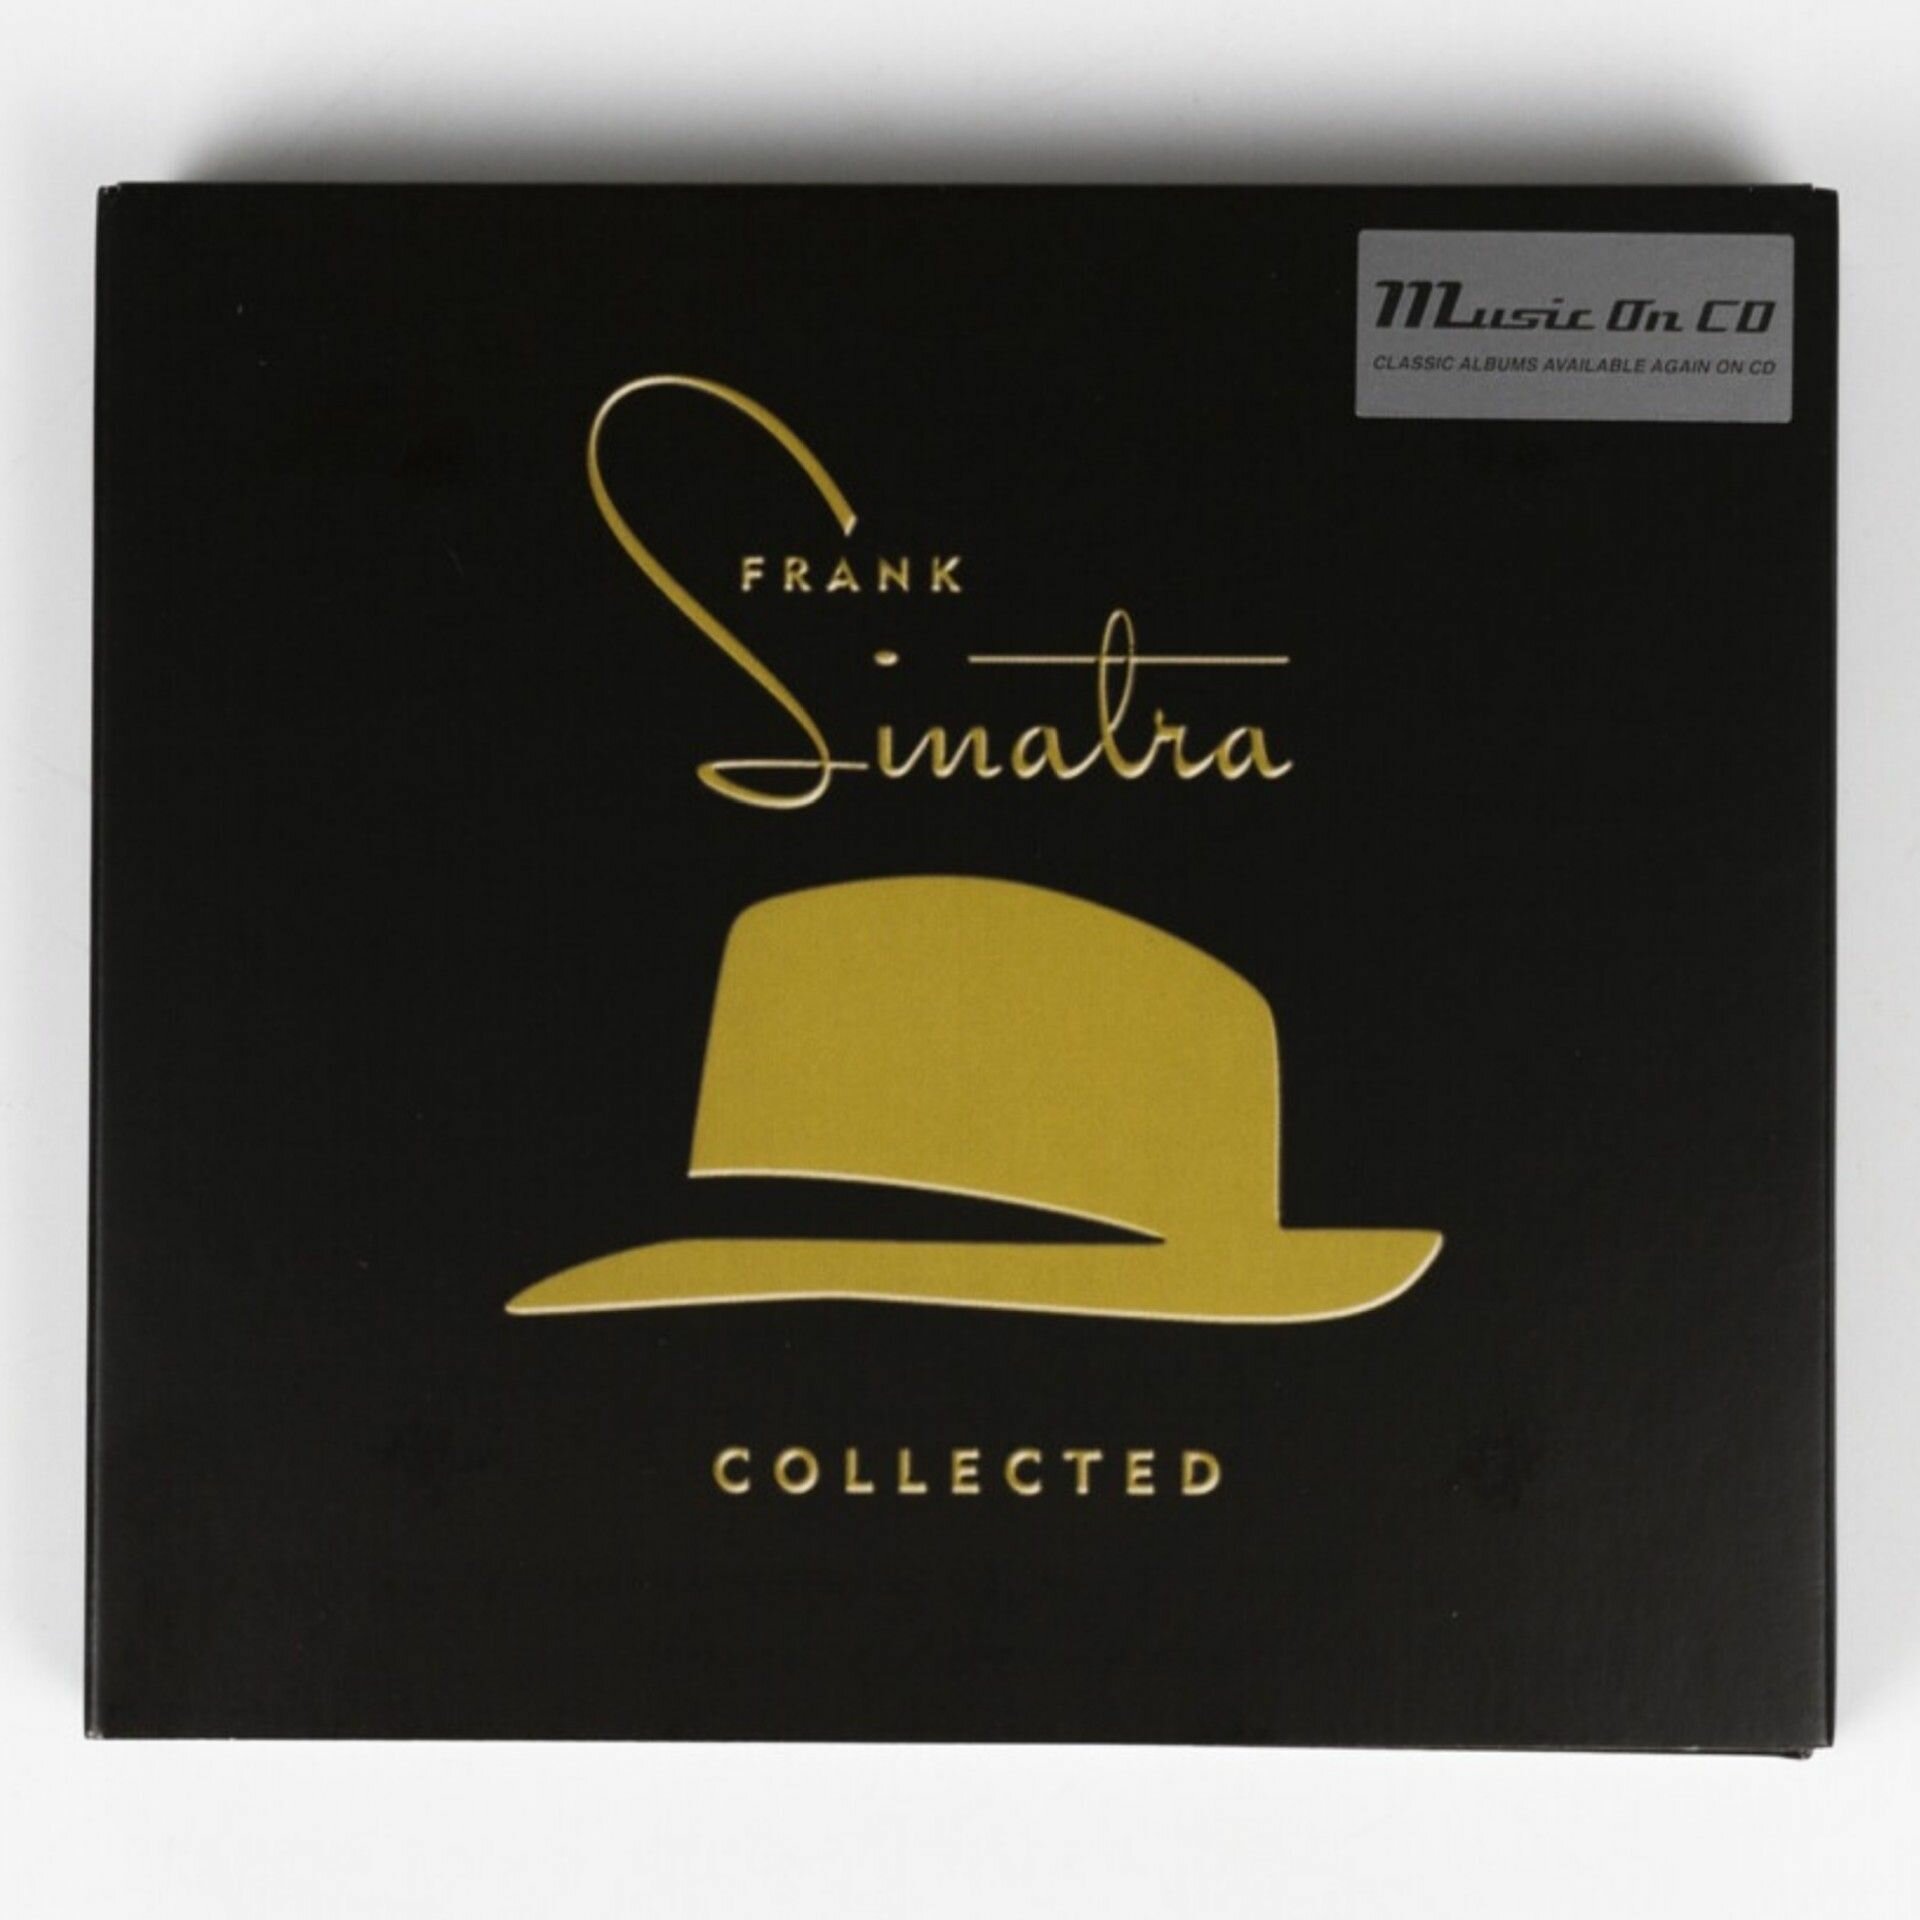 3CD Sinatra Frank - Collected